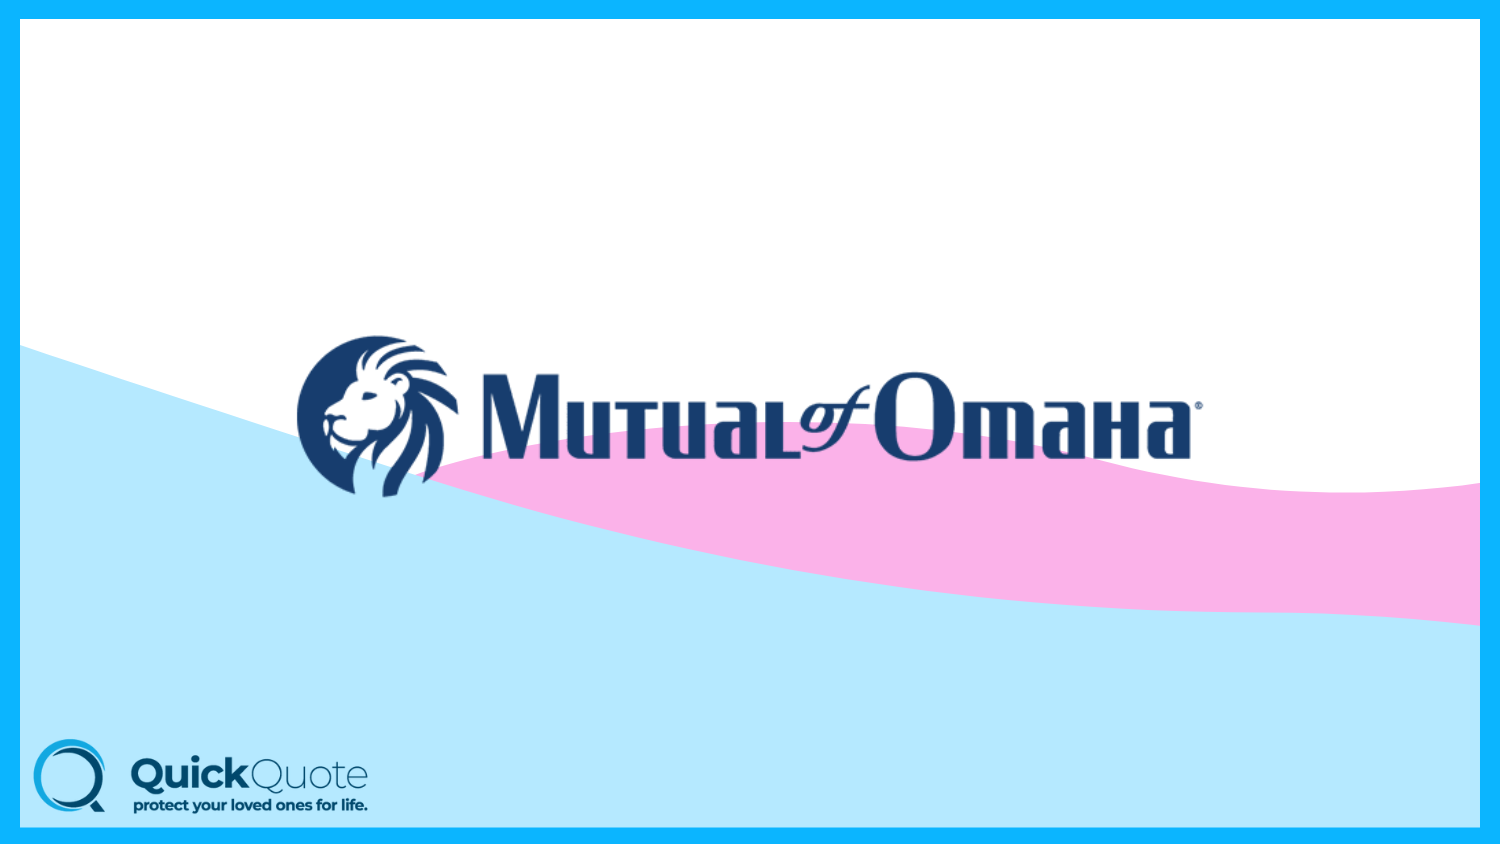 Mutual of Omaha: Best Life Insurance for People With Disabilities